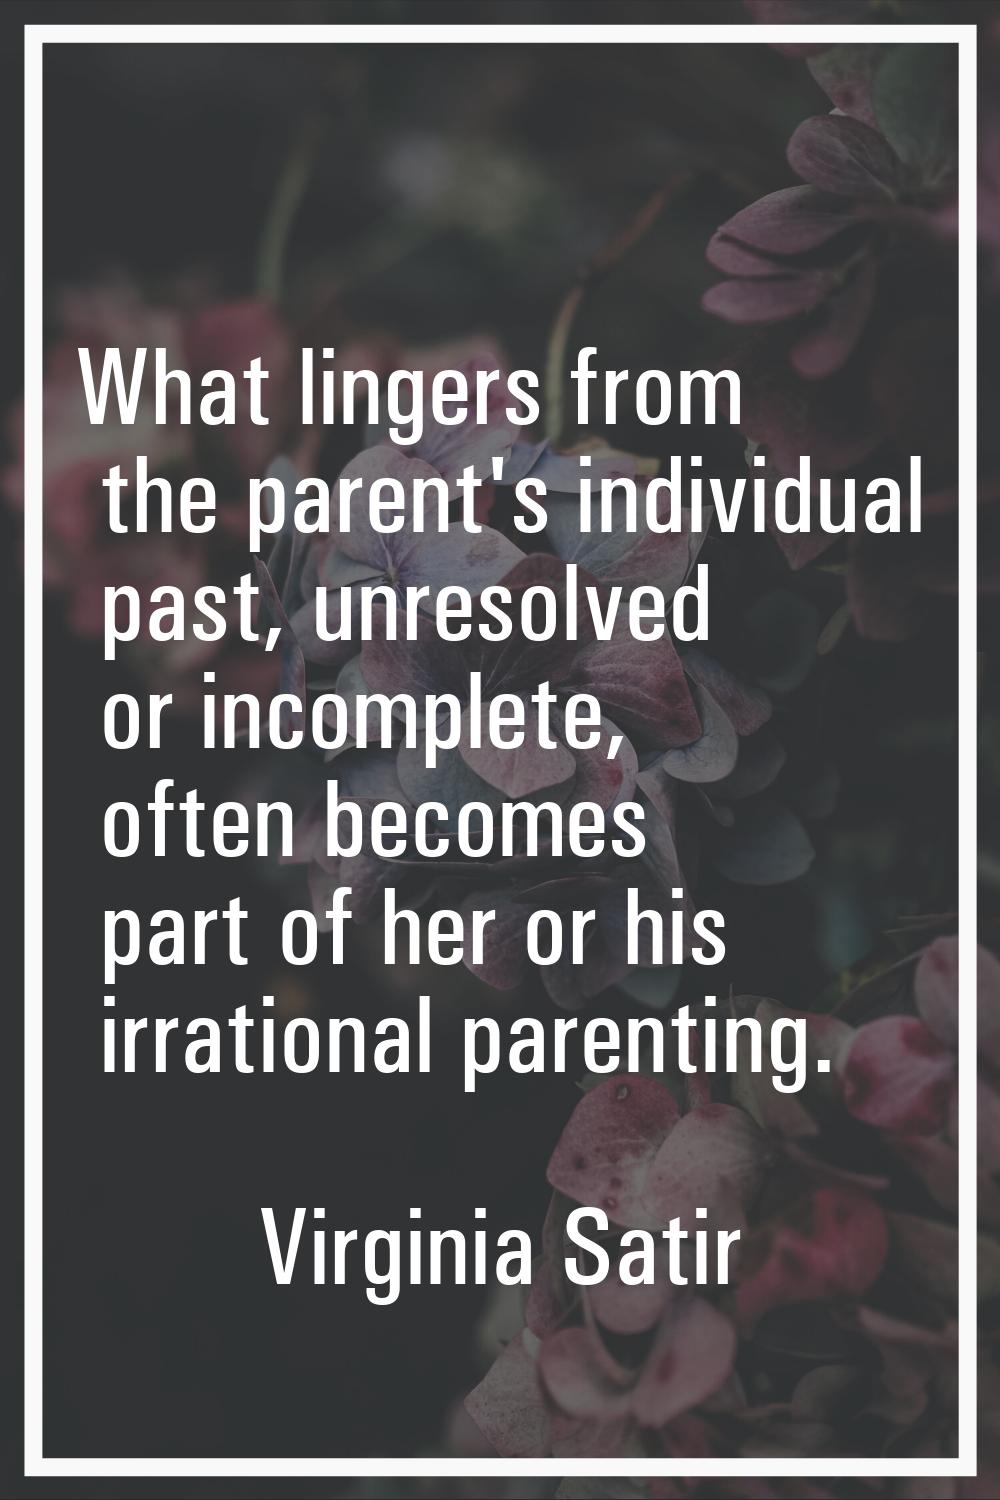 What lingers from the parent's individual past, unresolved or incomplete, often becomes part of her